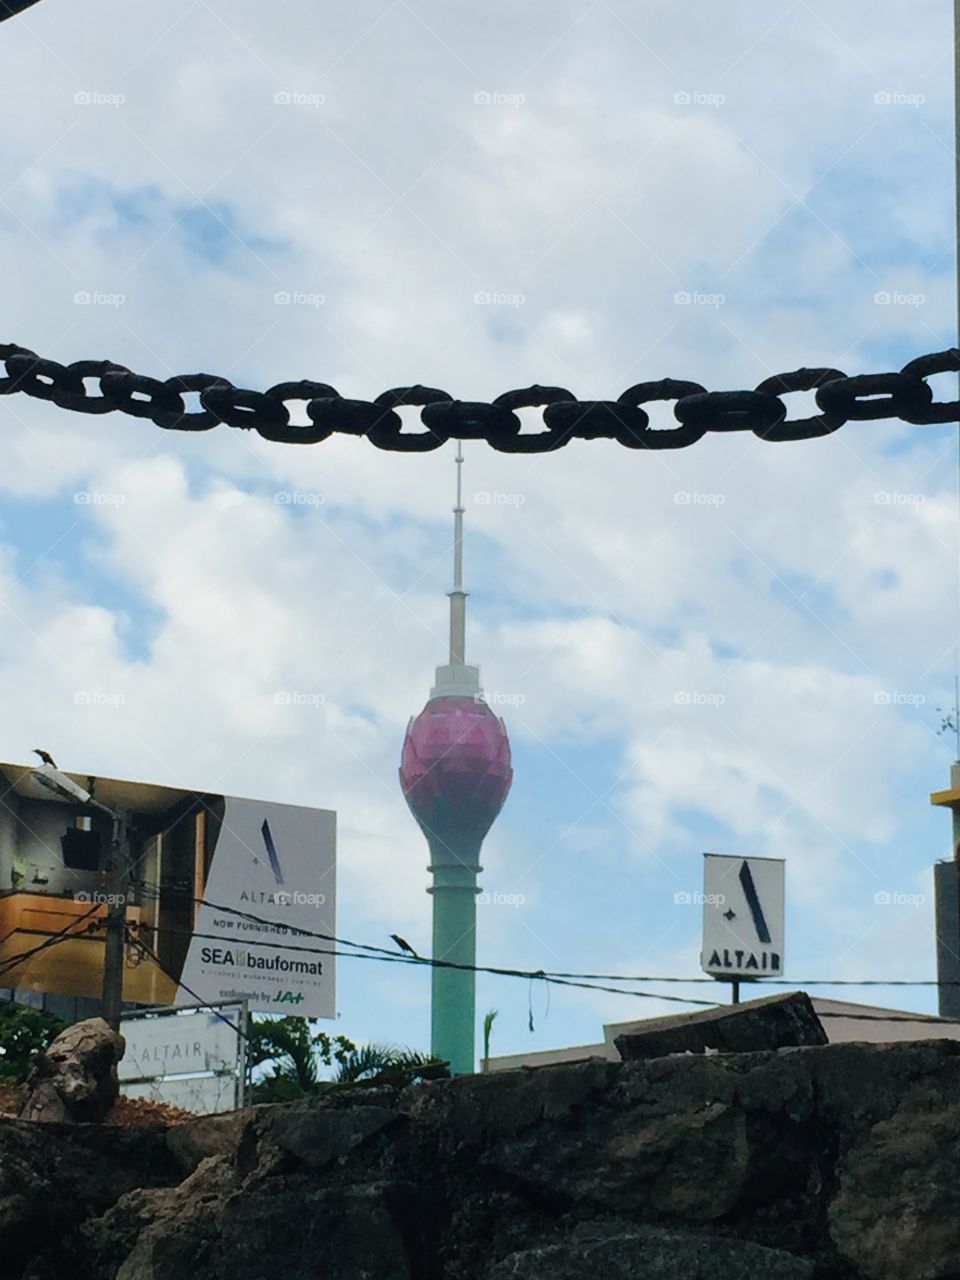 Lotus tower with chain 